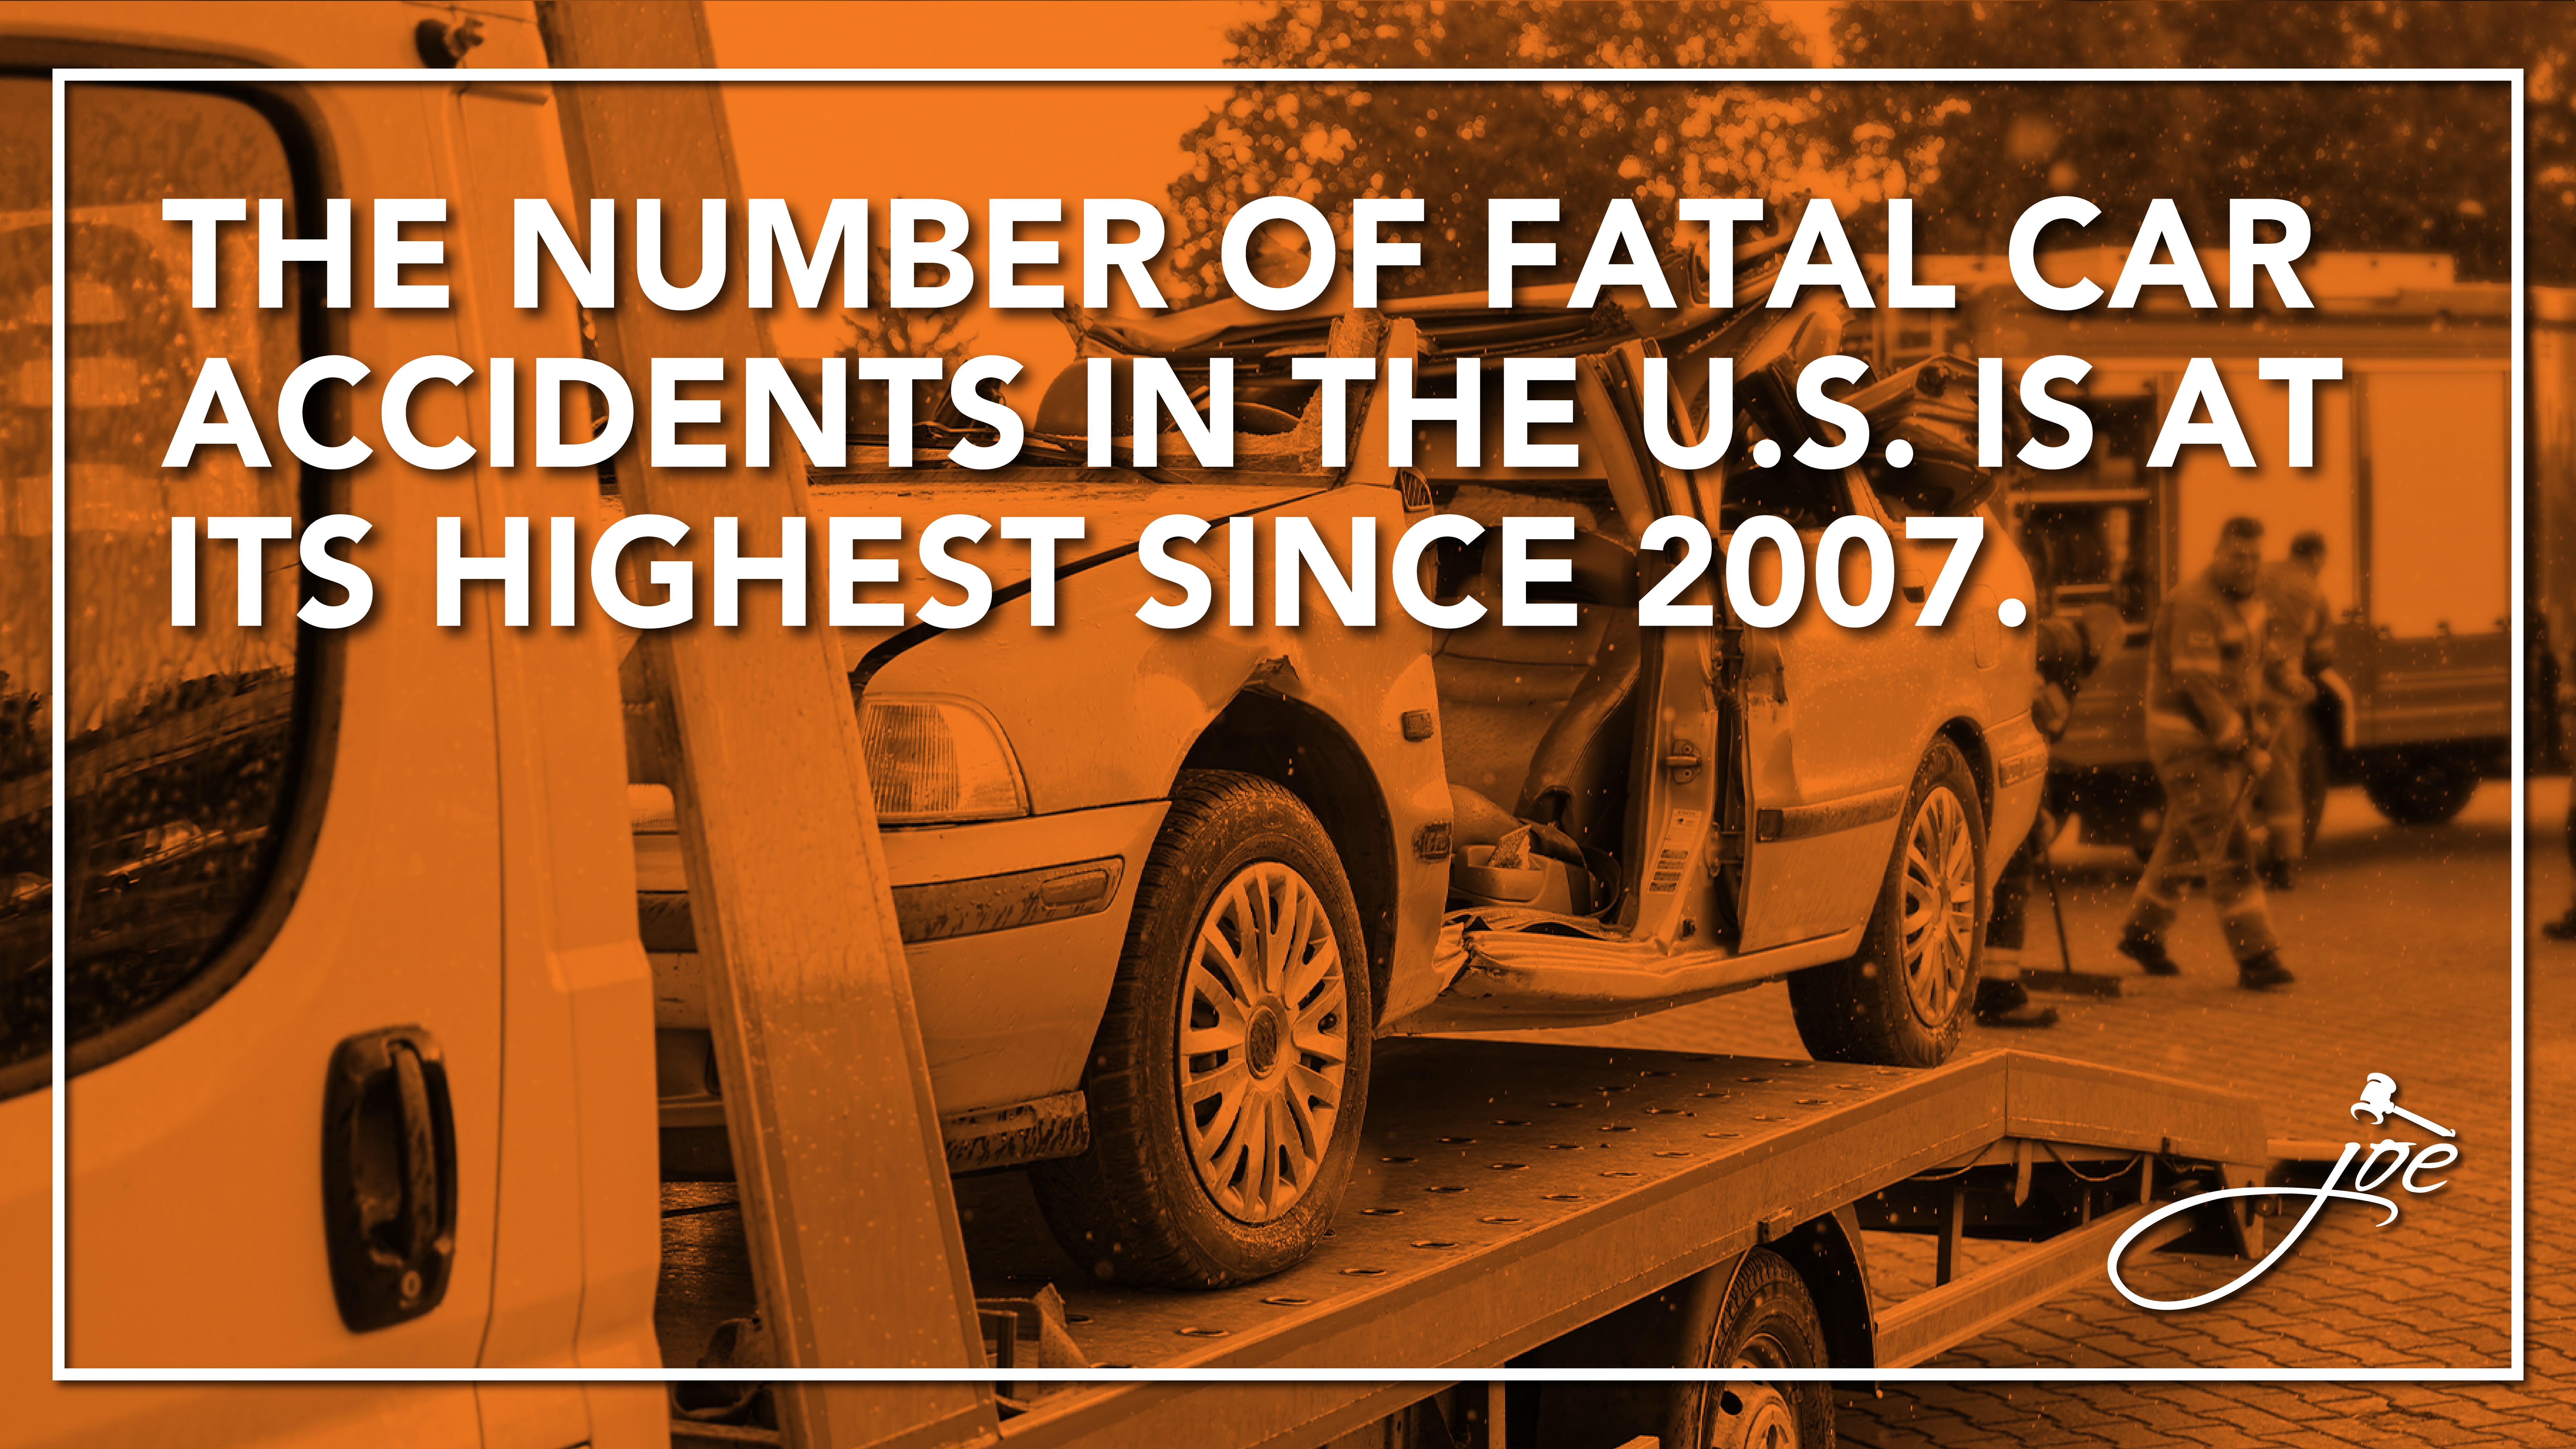 The Number Of Fatal Car Accidents In The U.S. Is At Its Highest Since 2007.